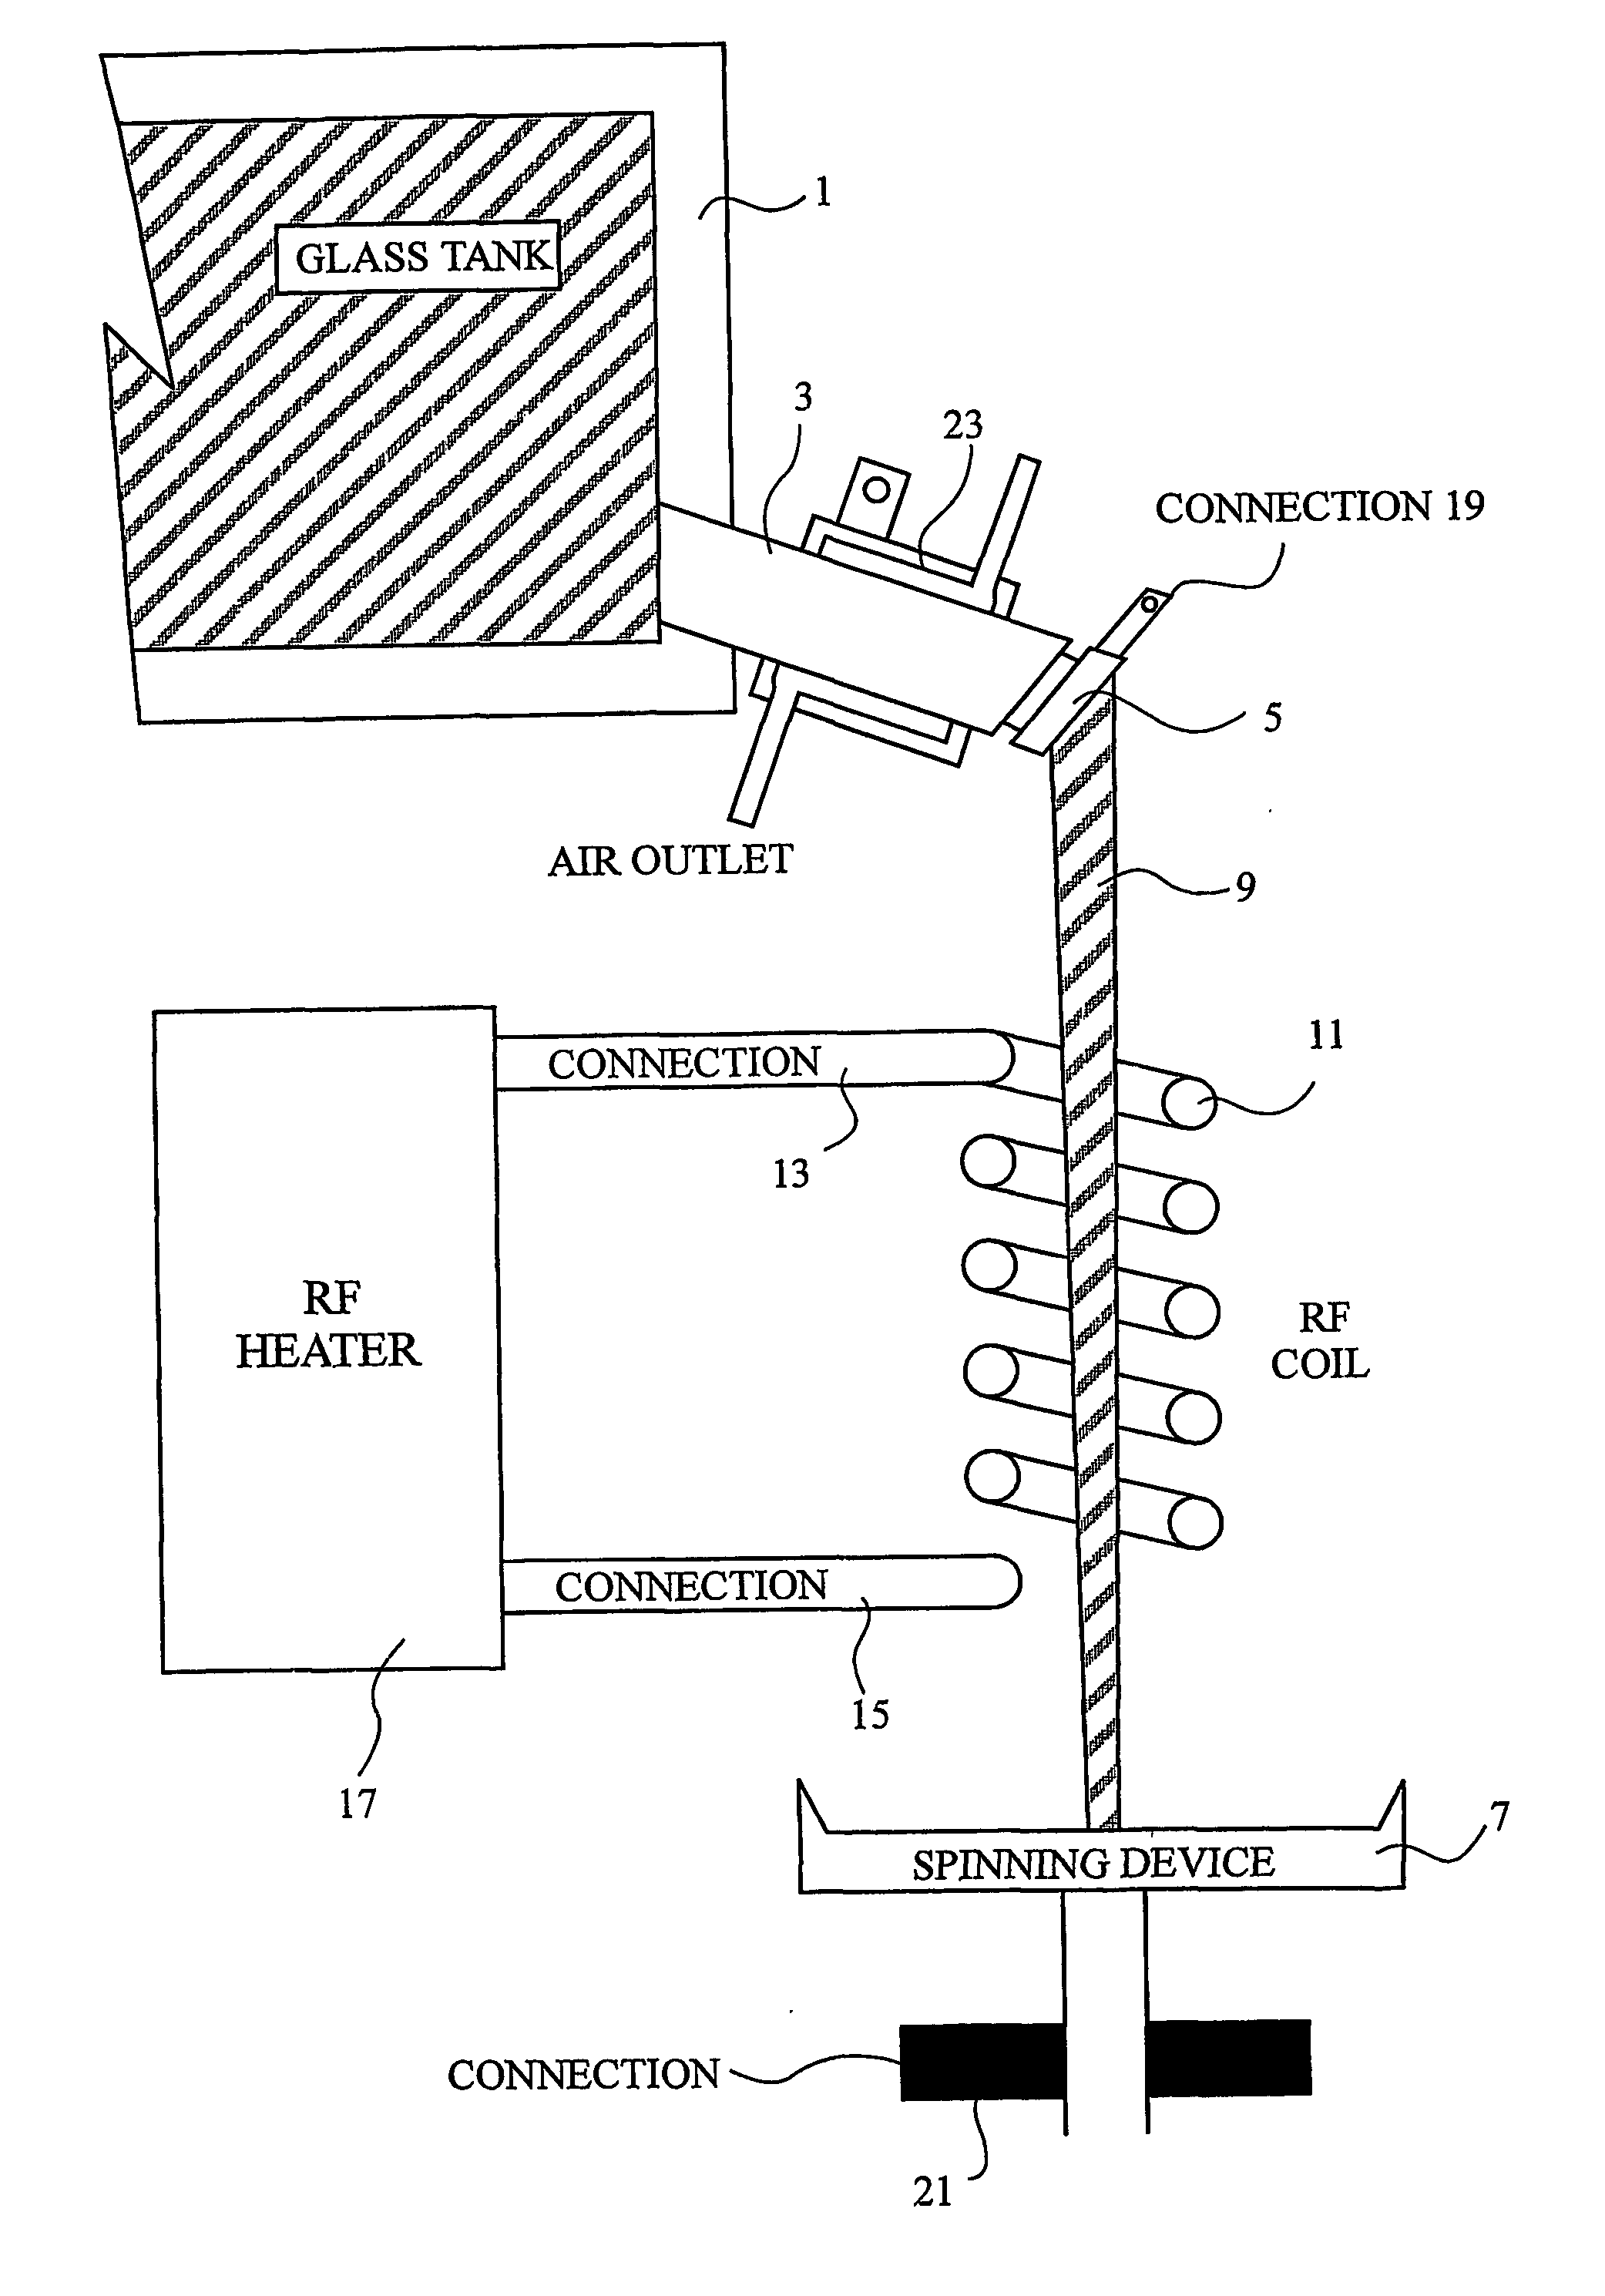 Method and apparatus for forming glass flakes and fibres